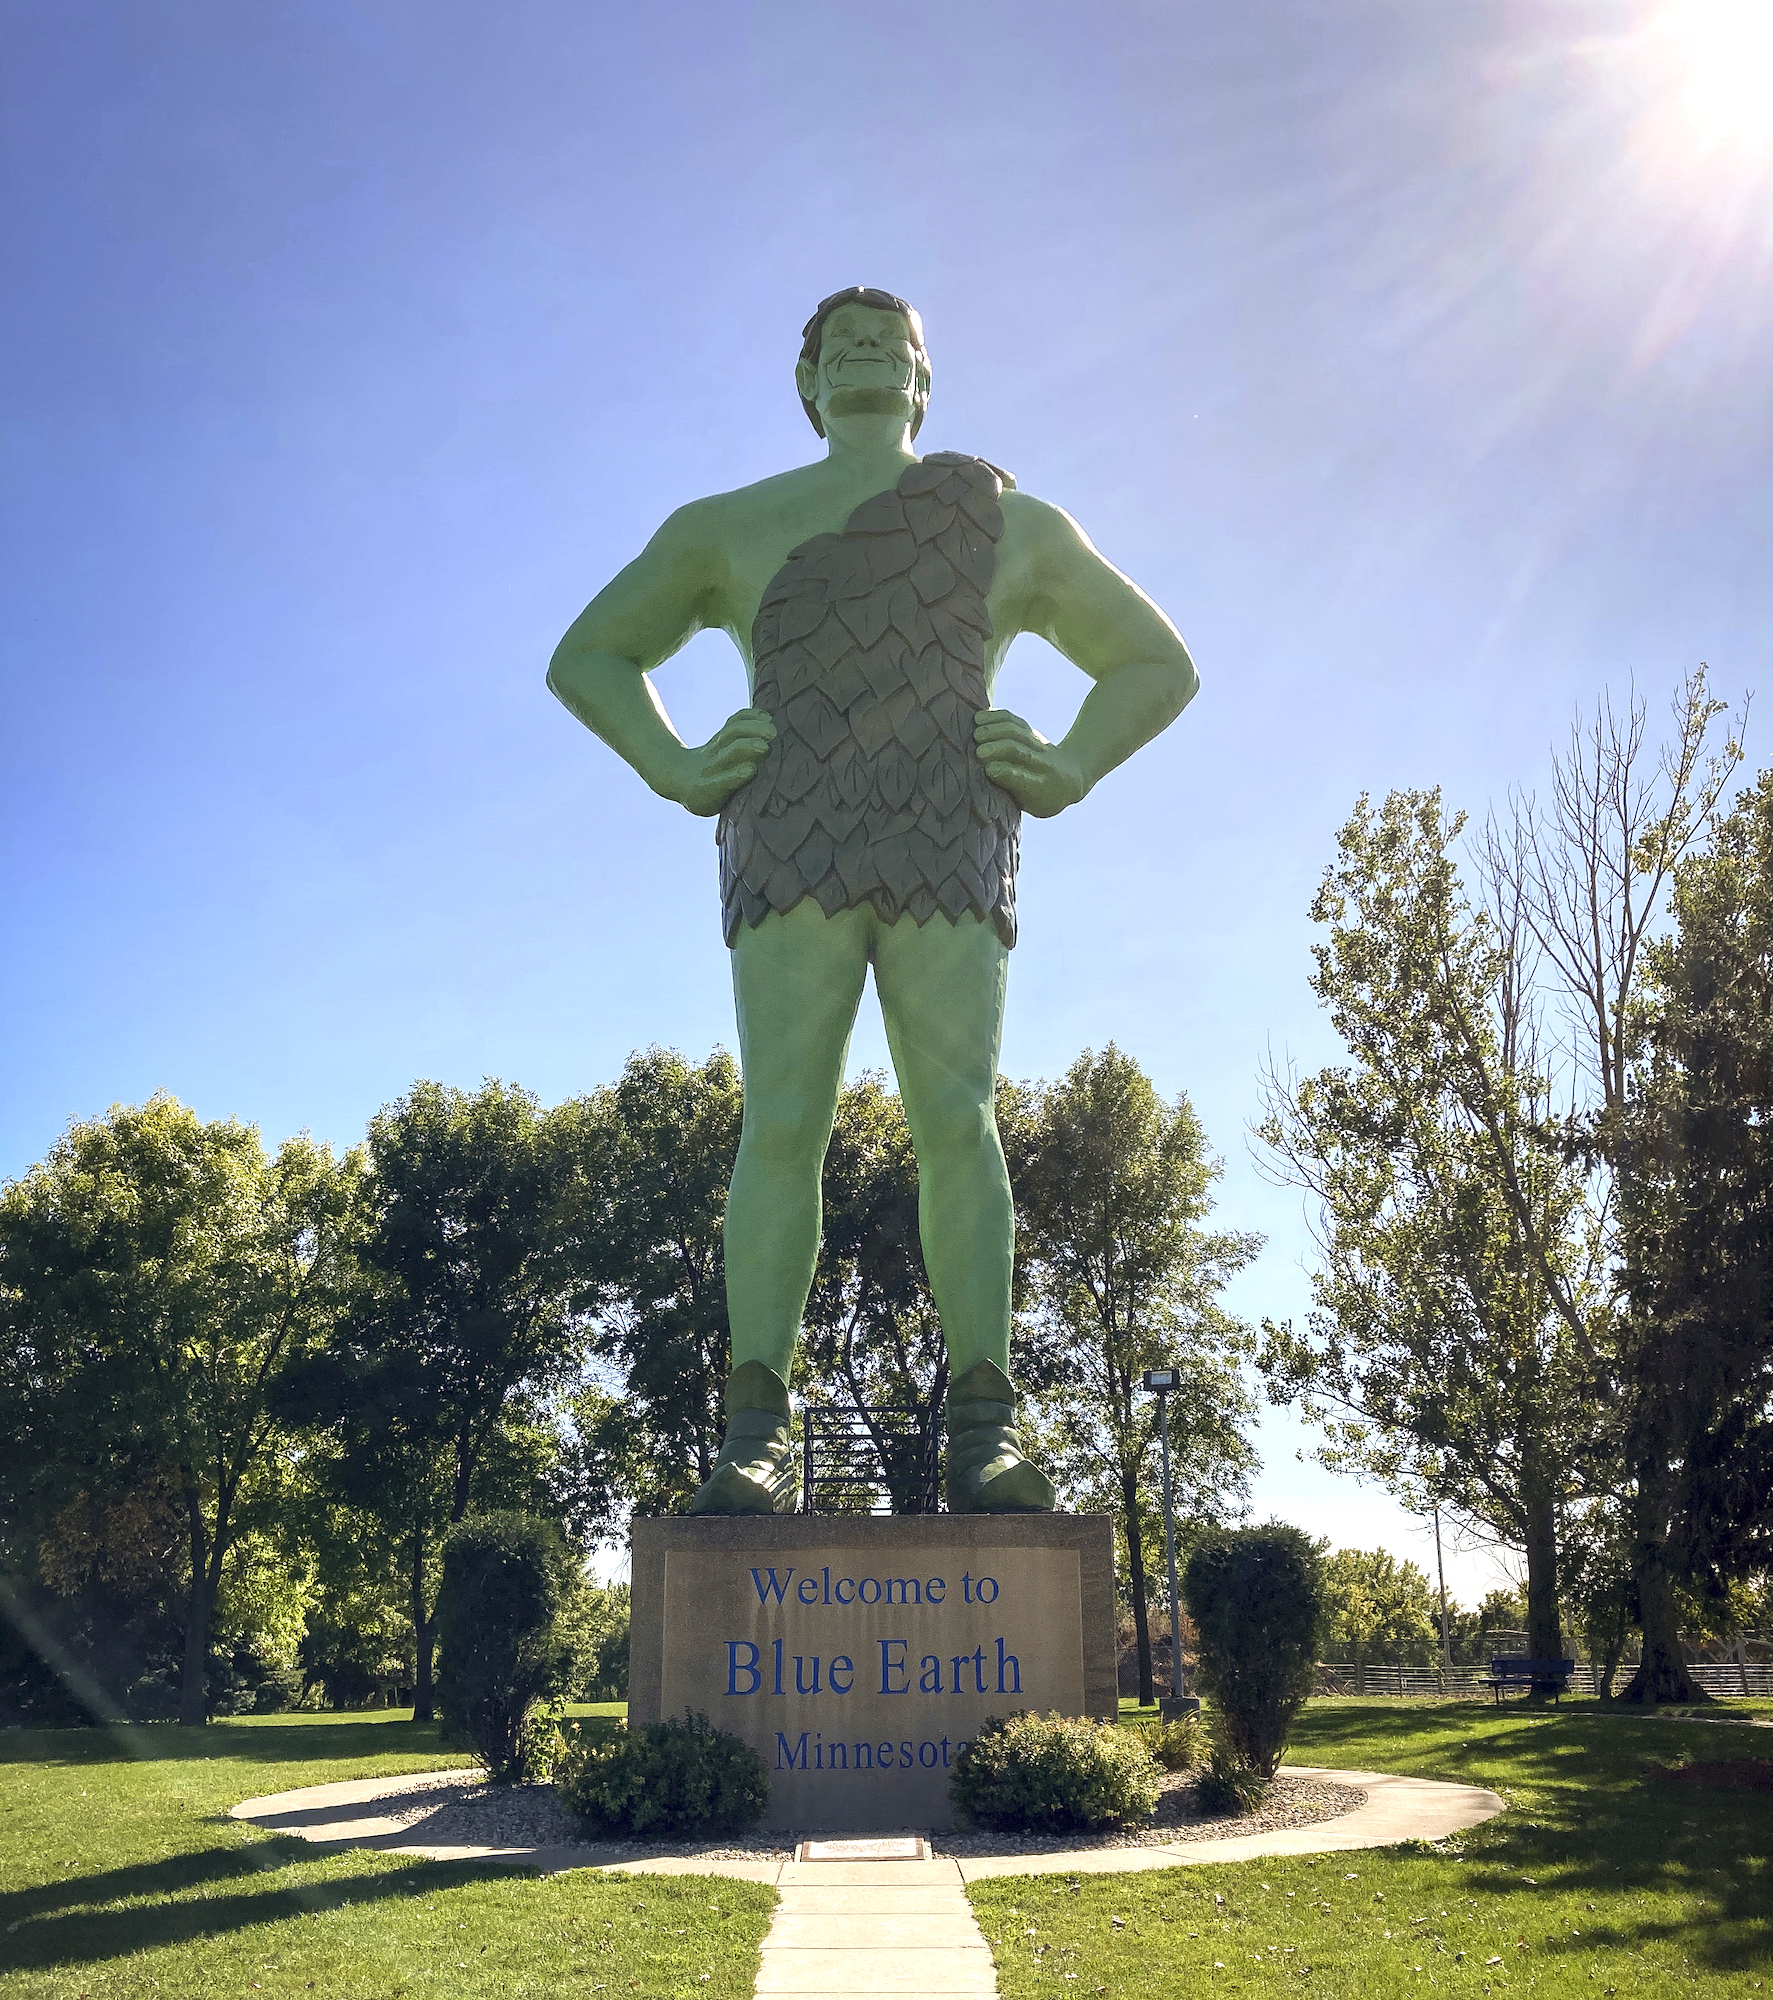 see the green giant statue